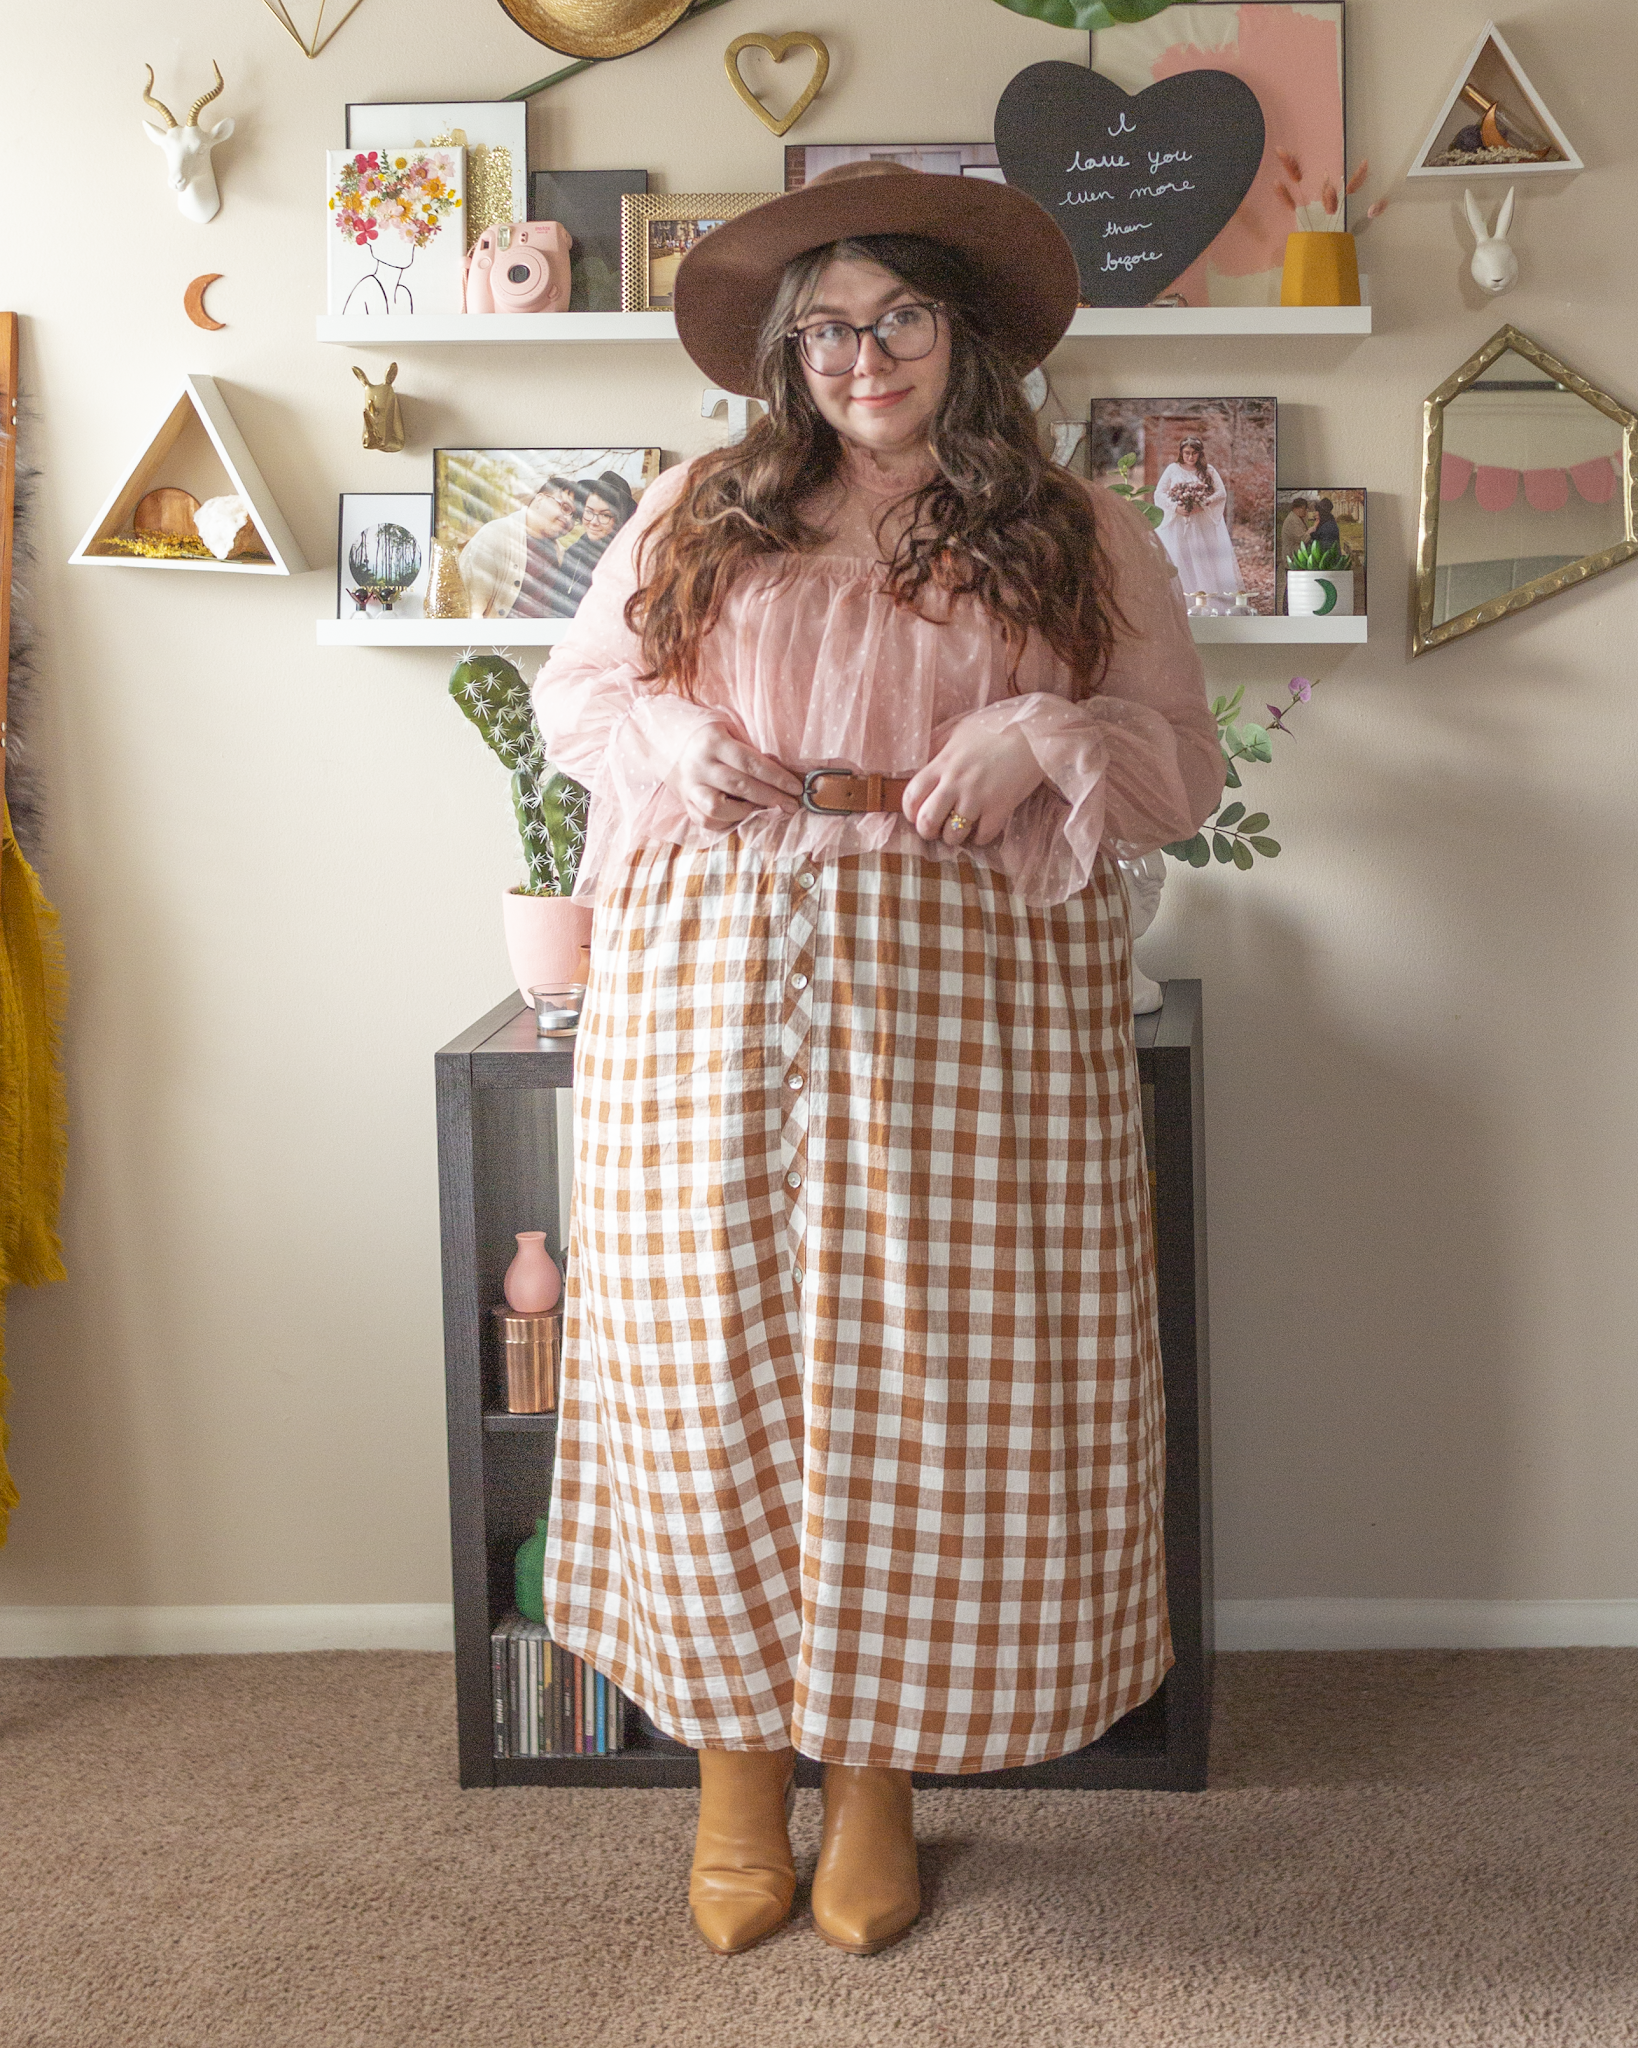 An outfit consisting of a dark brown wide brim hat, pastel pink high neck long sleeve sheer tiered blouse with polka dots and ruffle hem sleeve tucked into a brown and white gingham button down dress, worn as a skirt, and camel brown pointed toe Chelsea boots.